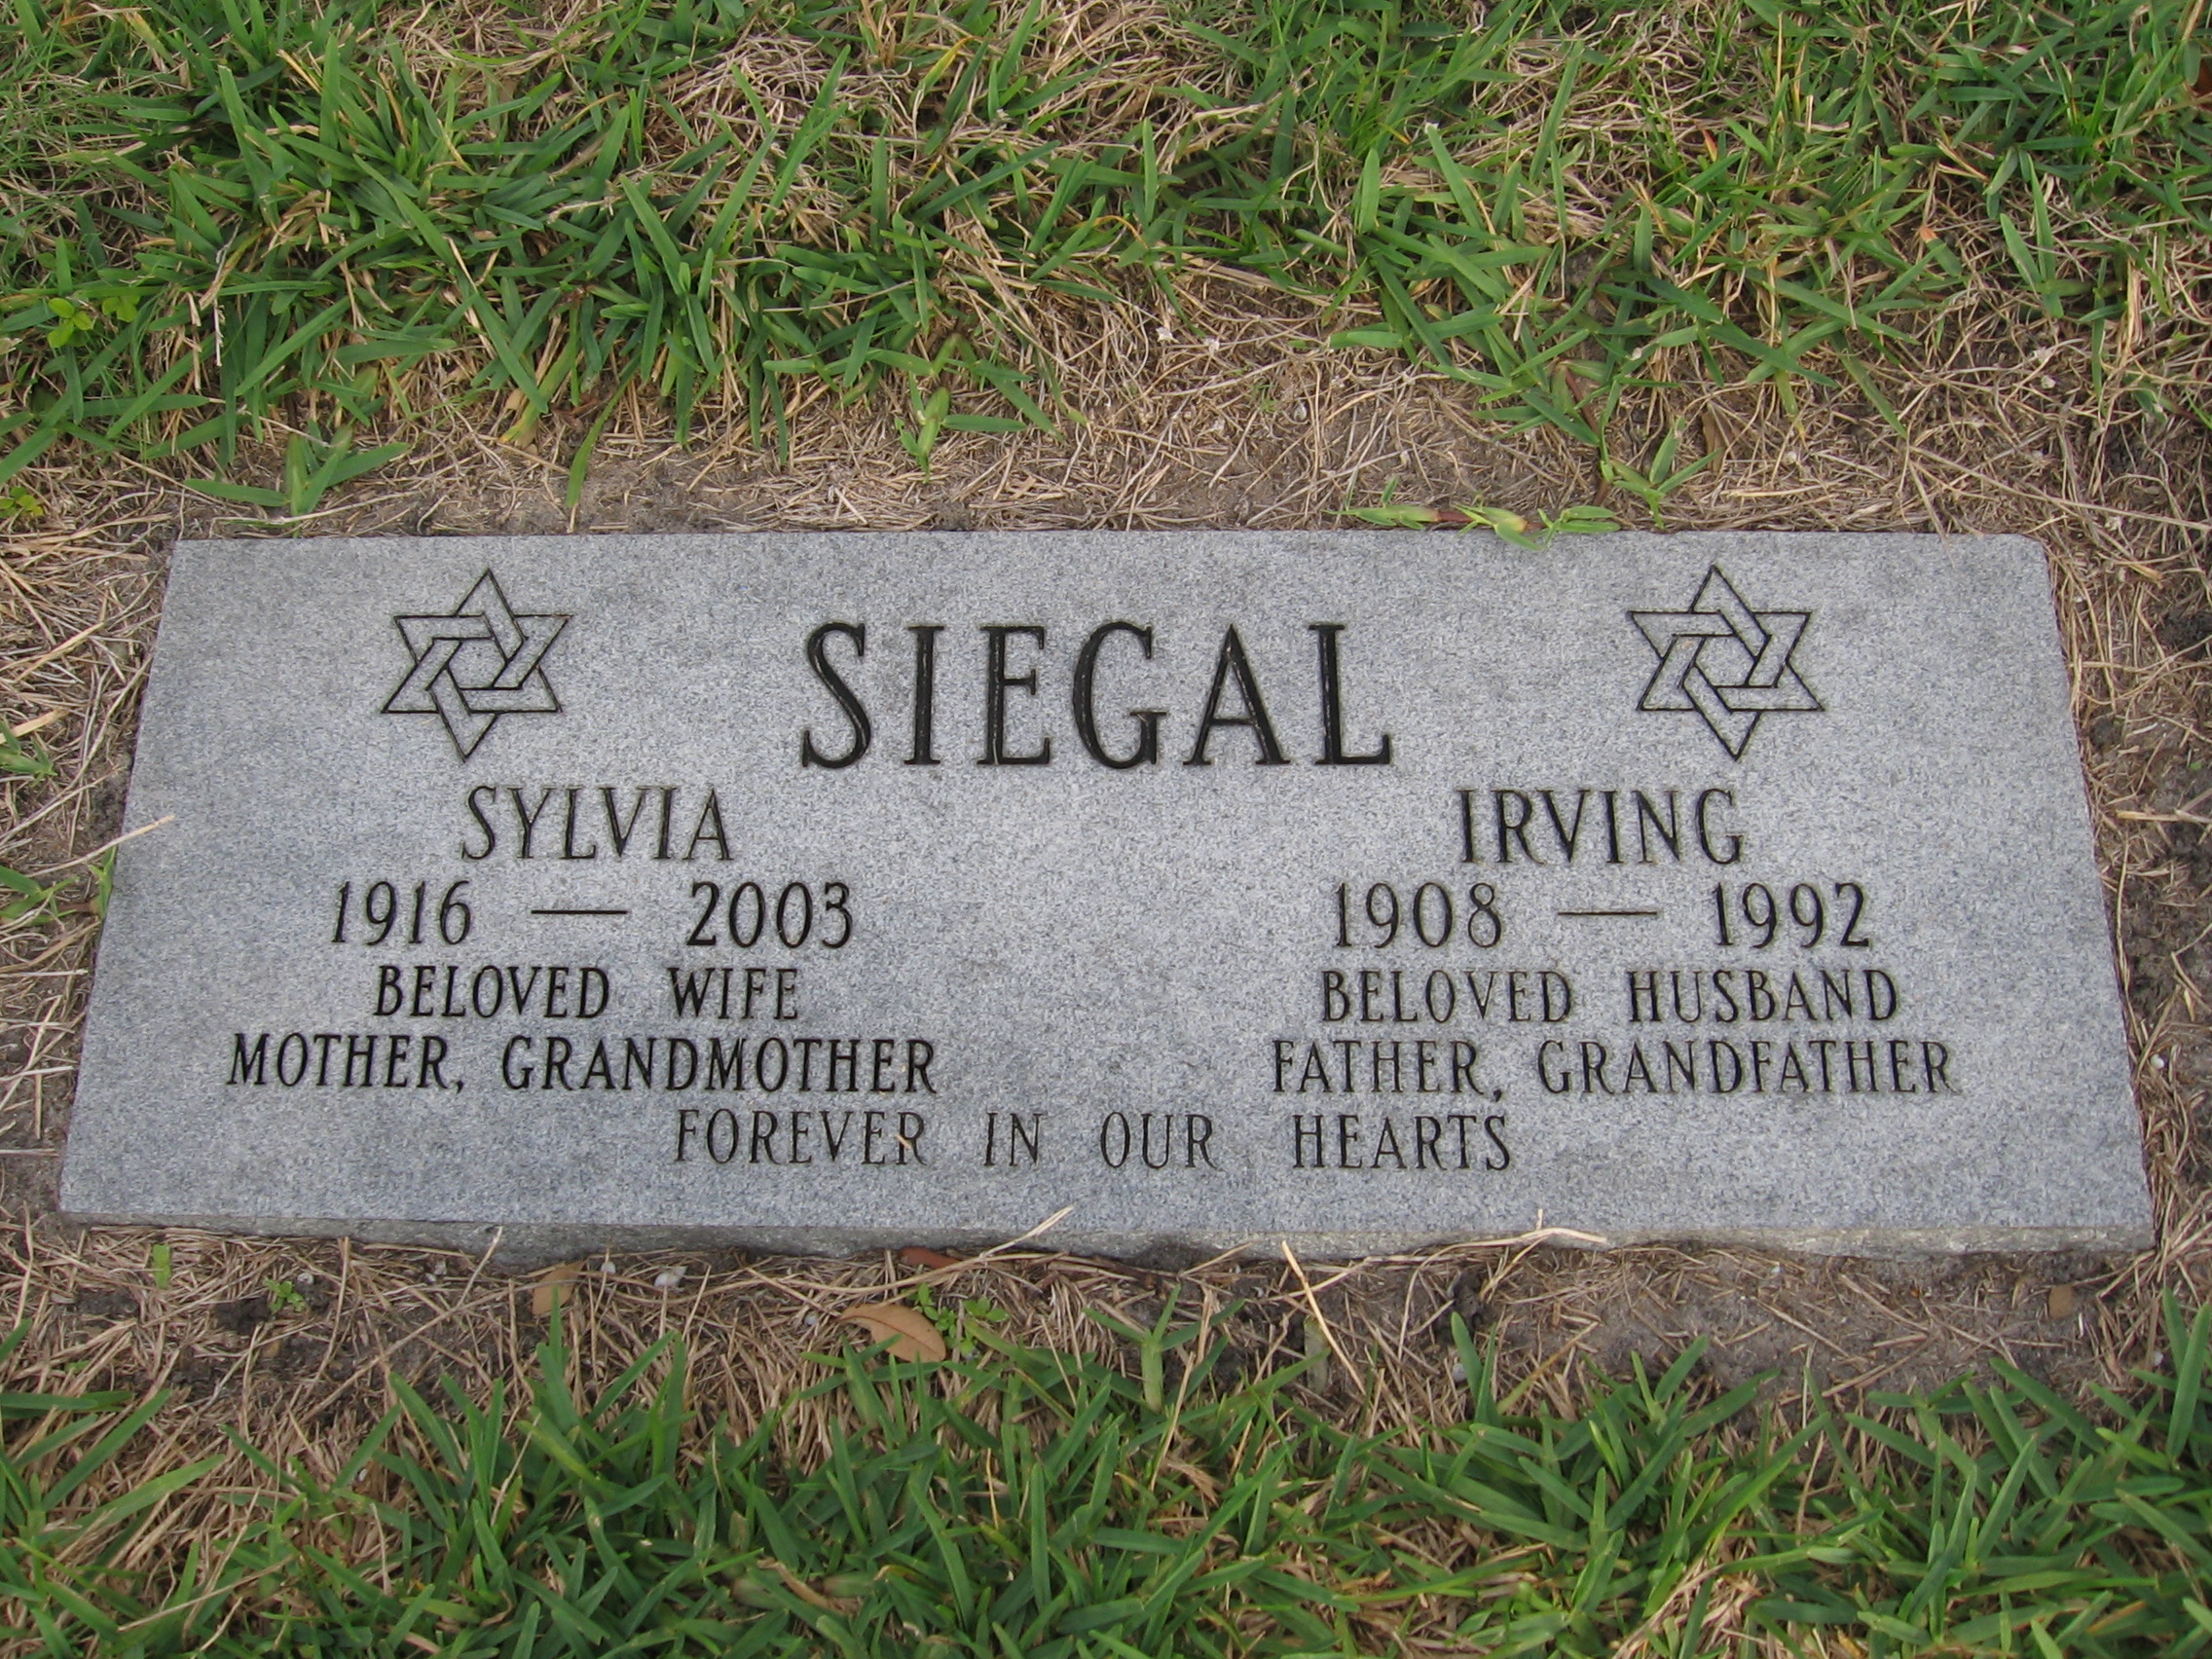 Irving Siegal